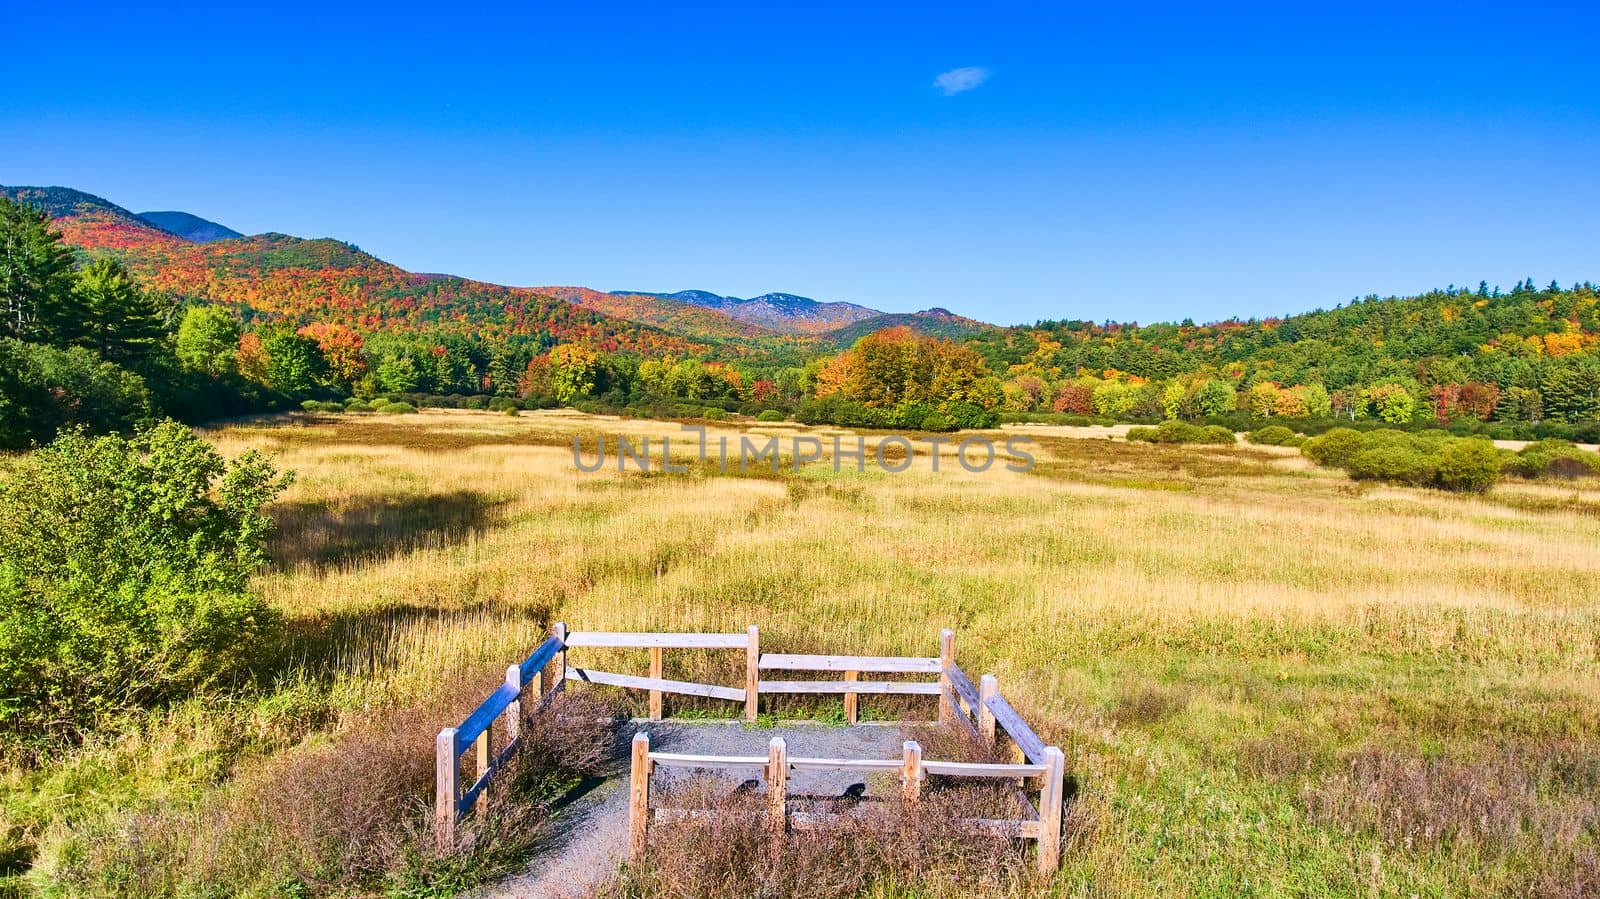 Image of Viewing spot for tourists overlooks beautiful field and colorful fall mountains